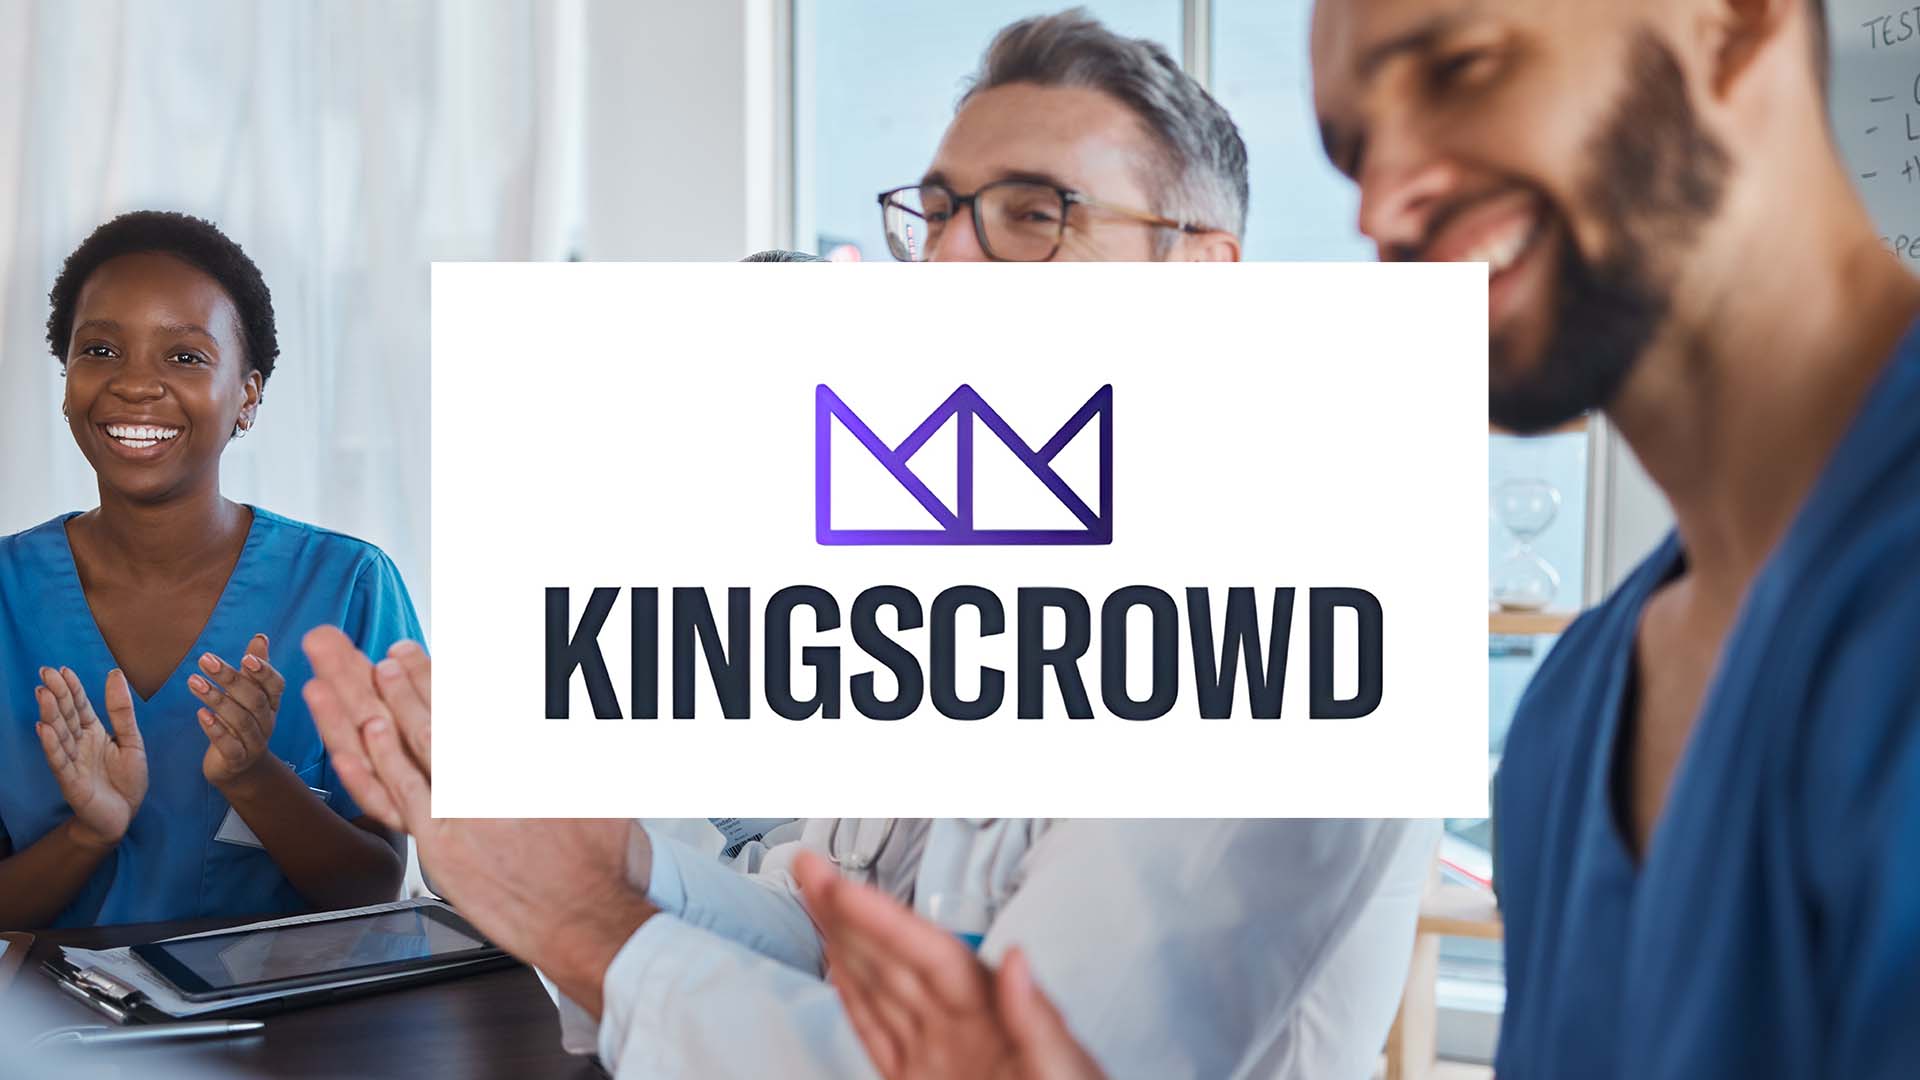 A group of clinical staff clap, the logo of Kingsford overlays the image.